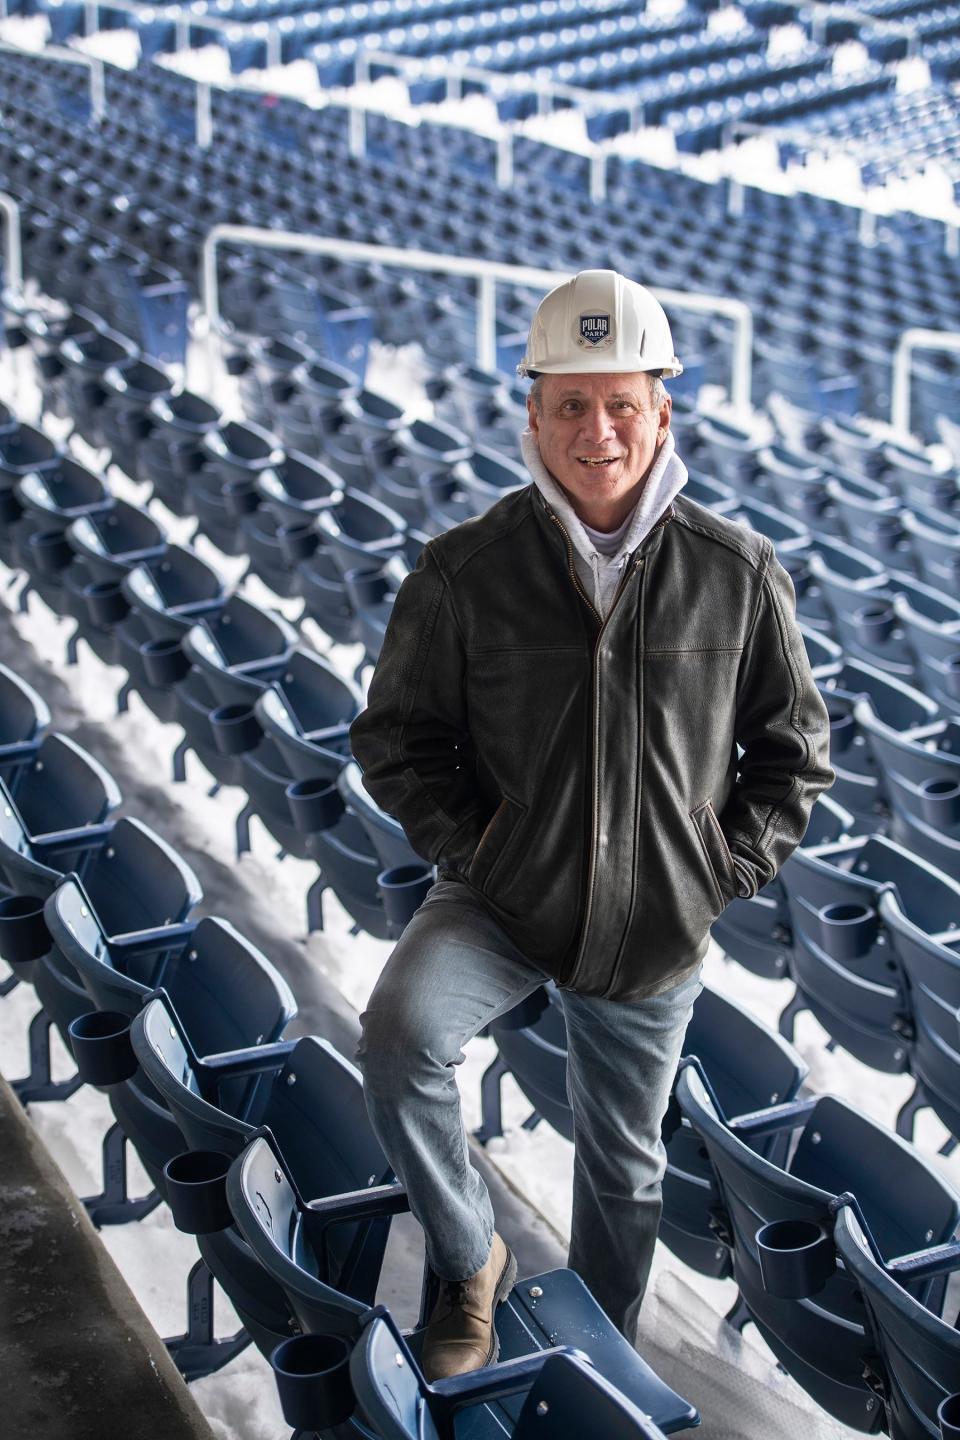 Larry Lucchino wears a Polar Park hard hat as he stands in the "Worcester Blue" seats.